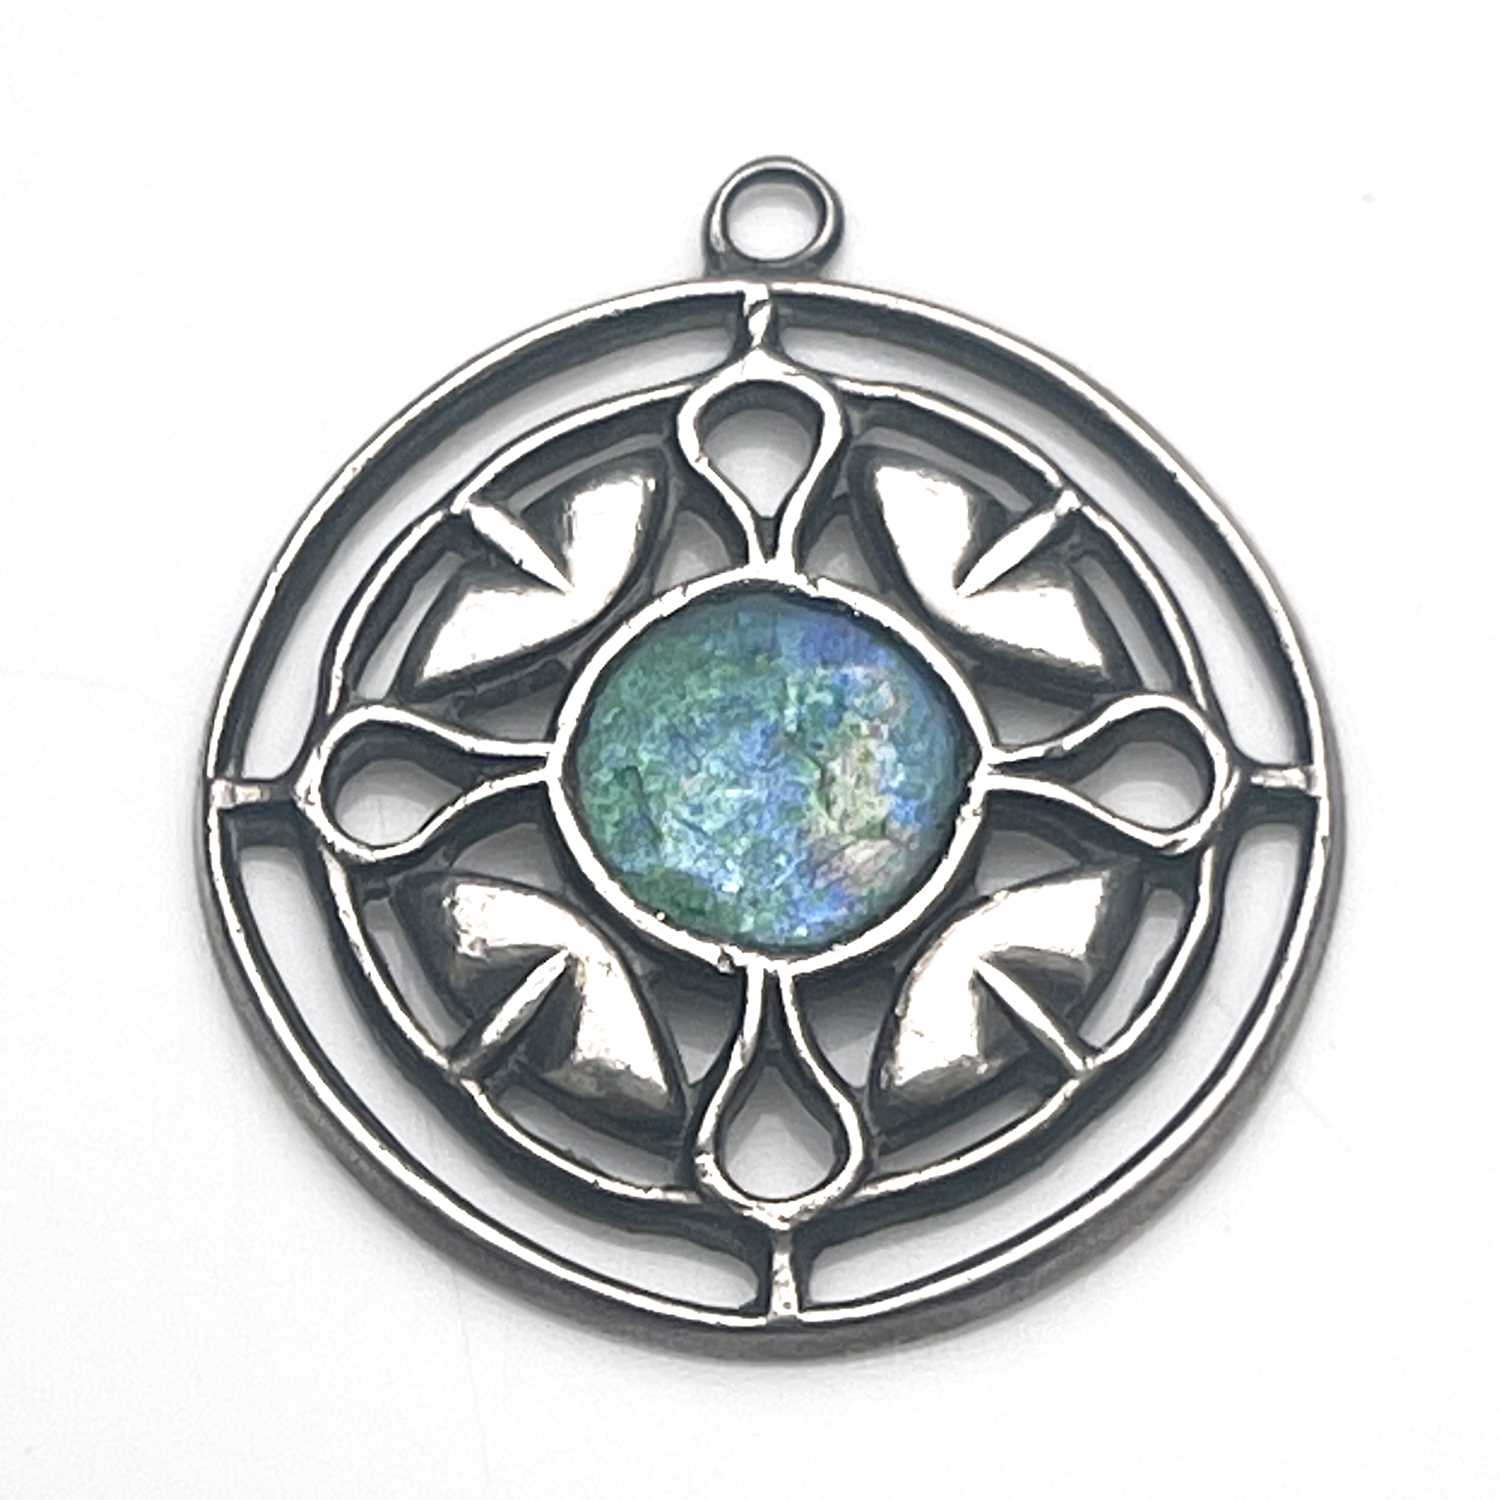 Jessie M King for Liberty and Co., an Arts and Crafts silver and enamelled pendant, circular form,